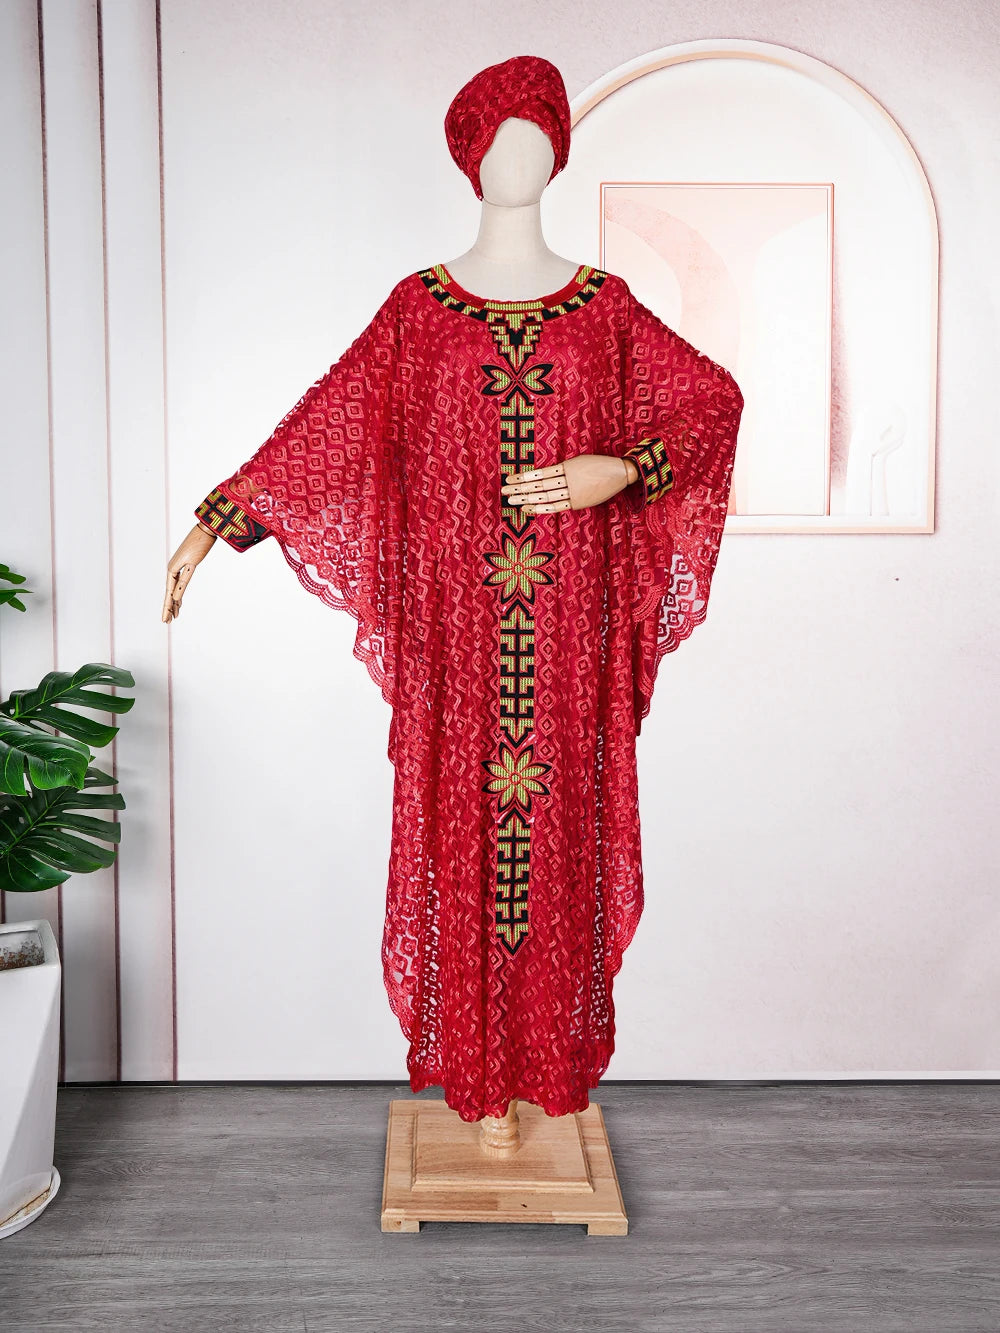 Stunning Muslim Fashion: Traditional African Lace Dashikis with Headtie - Flexi Africa - Flexi Africa offers Free Delivery Worldwide - Vibrant African traditional clothing showcasing bold prints and intricate designs